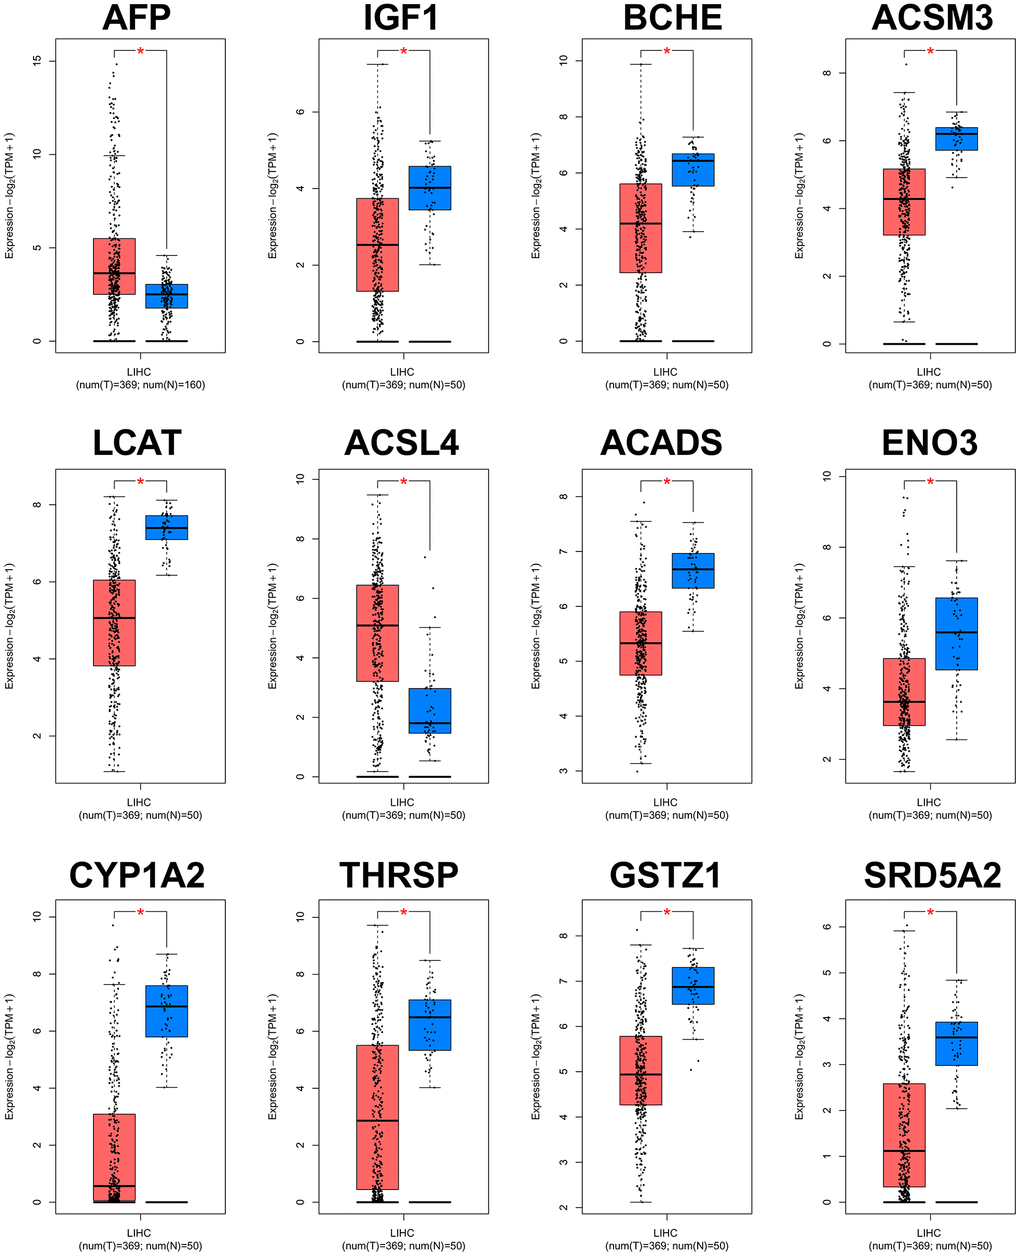 Validation of expression levels of the 12 hub genes in HCC and normal tissues using GEPIA. *P